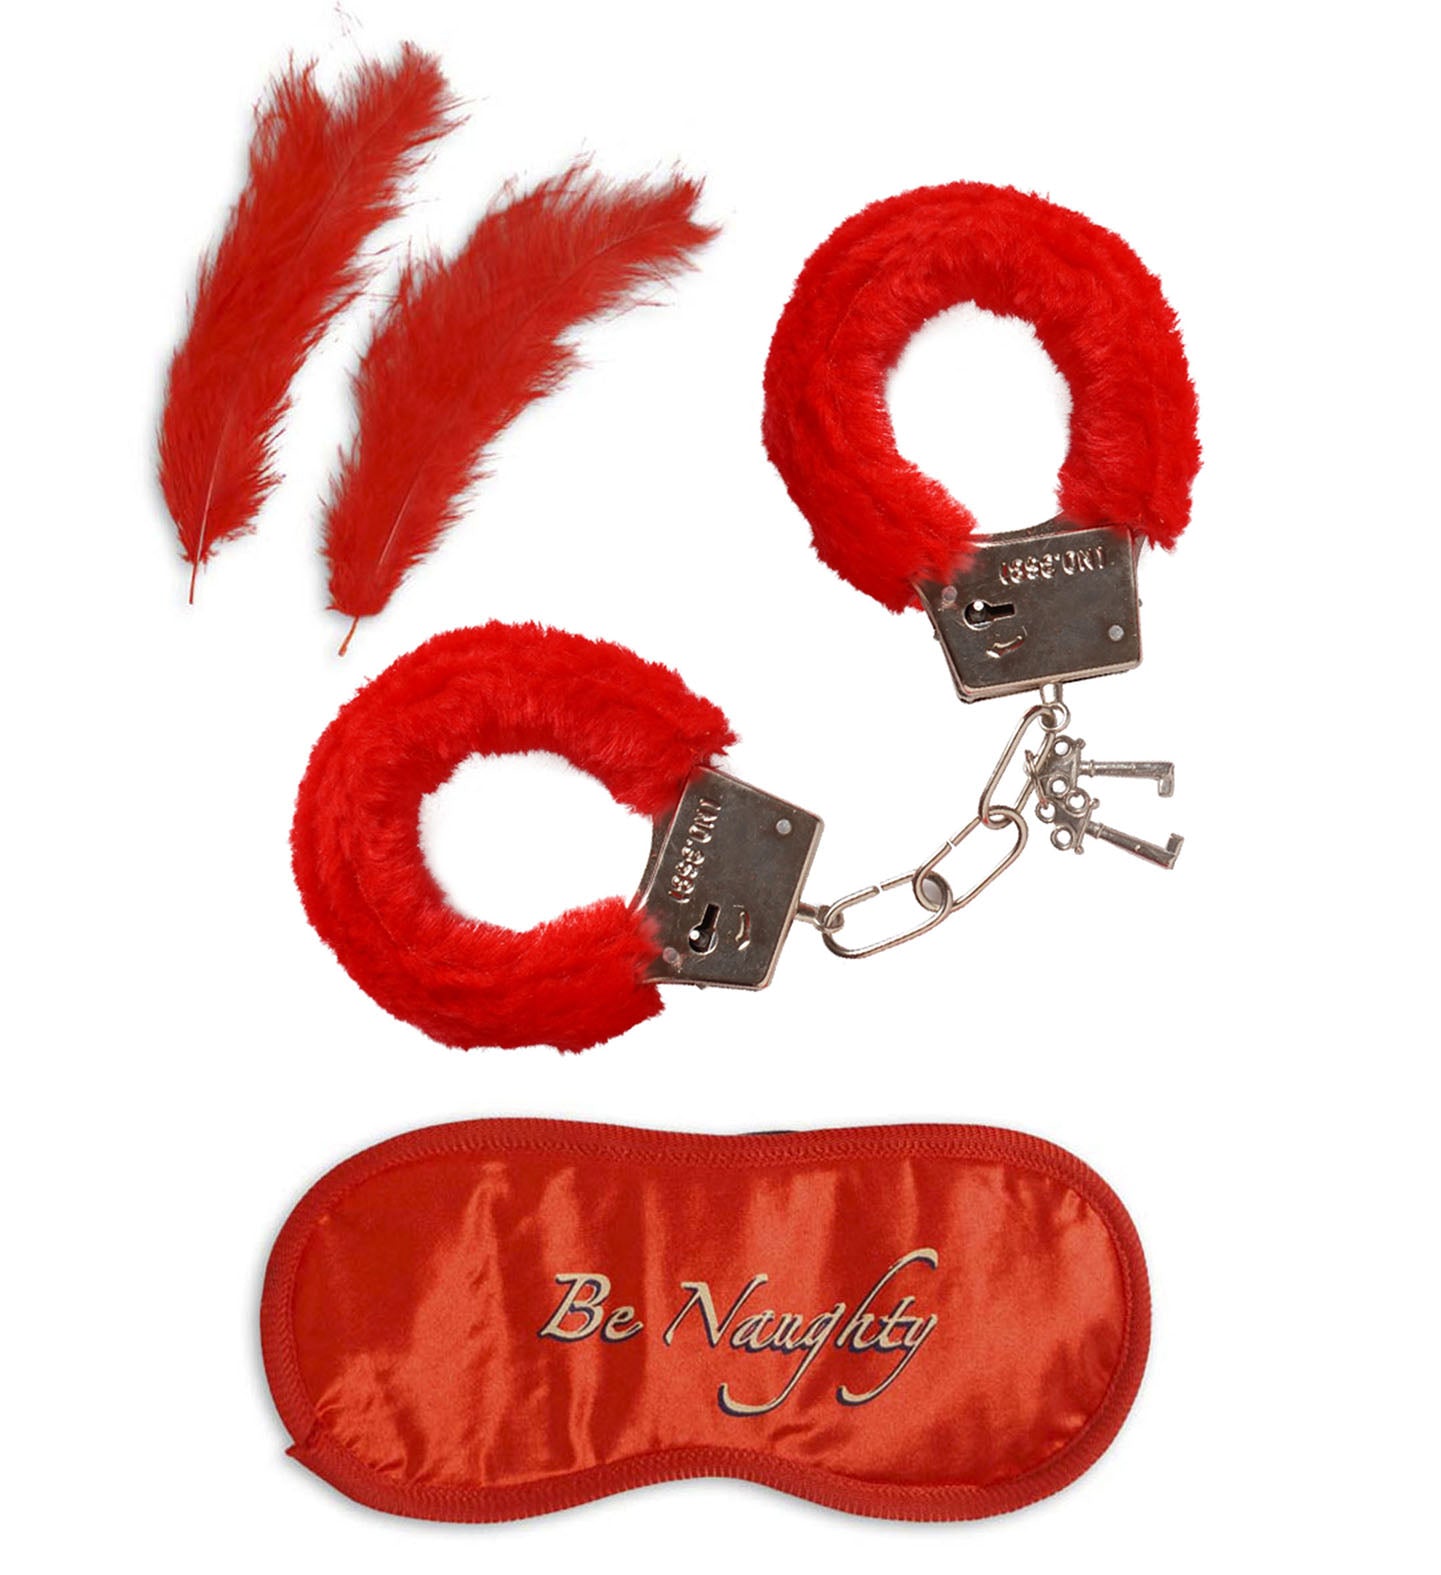 Lovers Naughty Fun Set Furry Handcuffs Mask Feathers